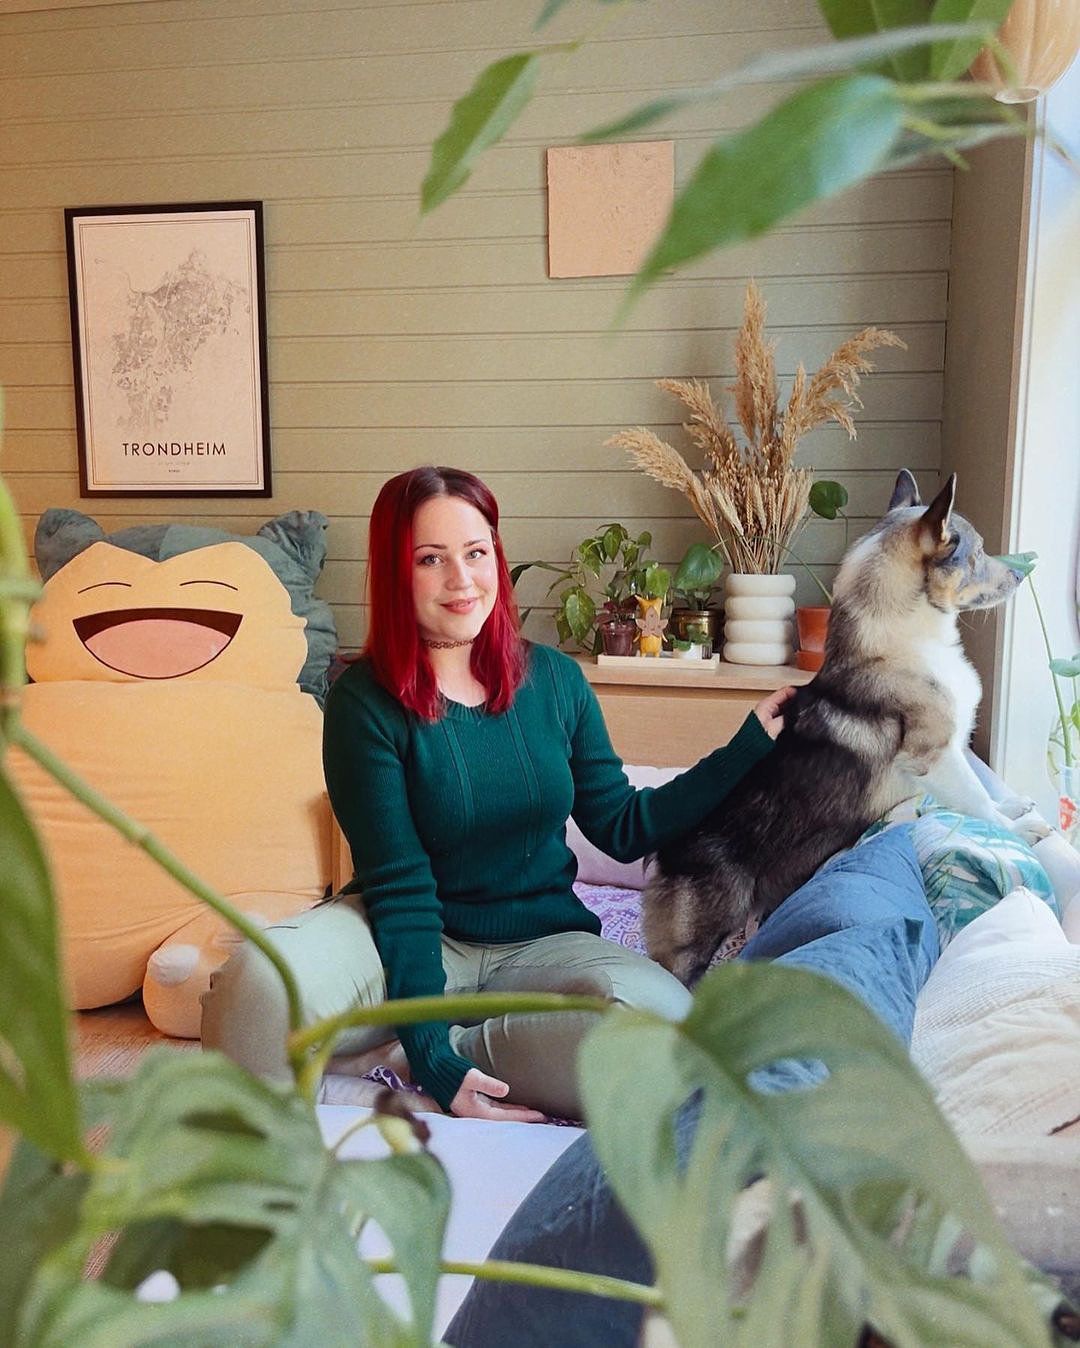 Tanja Renate Aakerøy, her dog Atlas and a large Snorlax plush toy